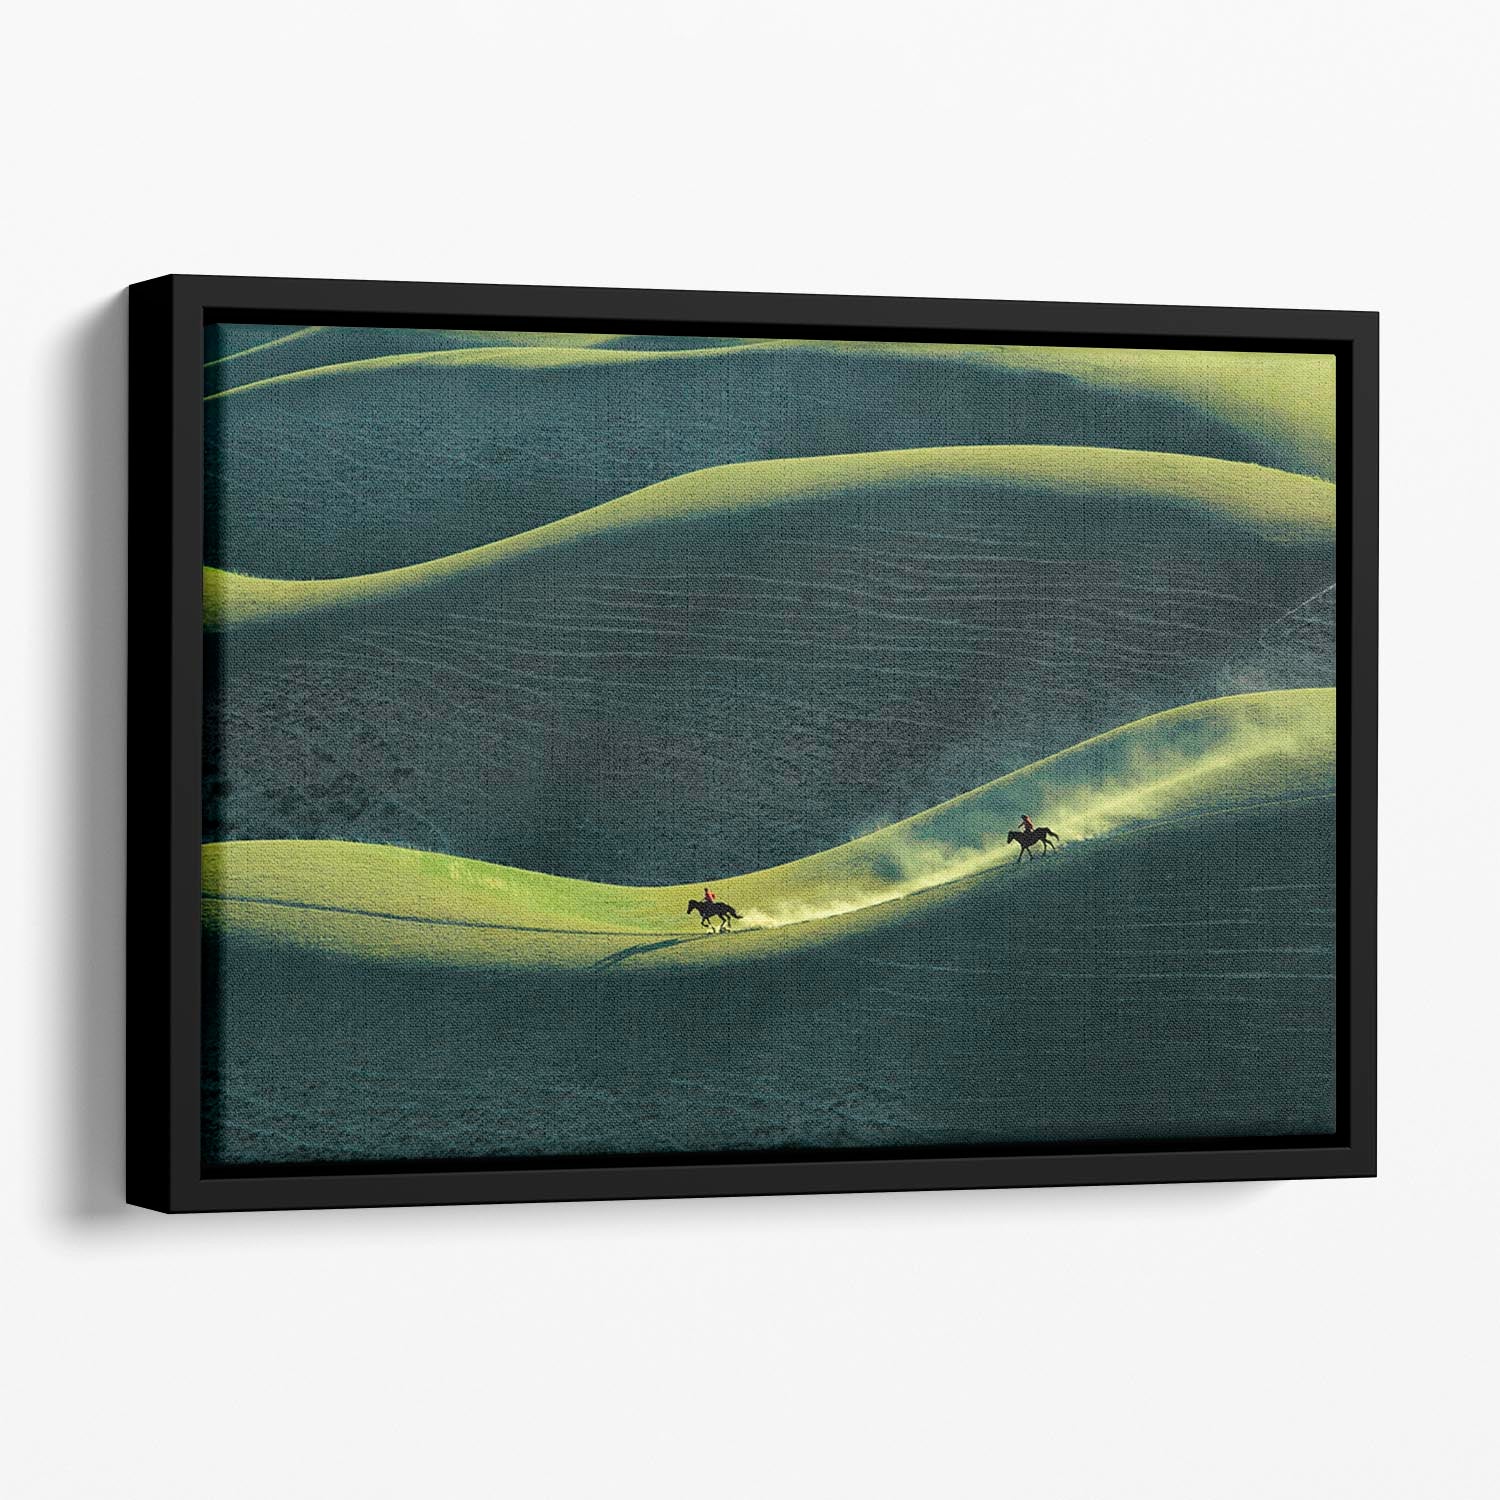 Horseriding In The Hills Floating Framed Canvas - Canvas Art Rocks - 1